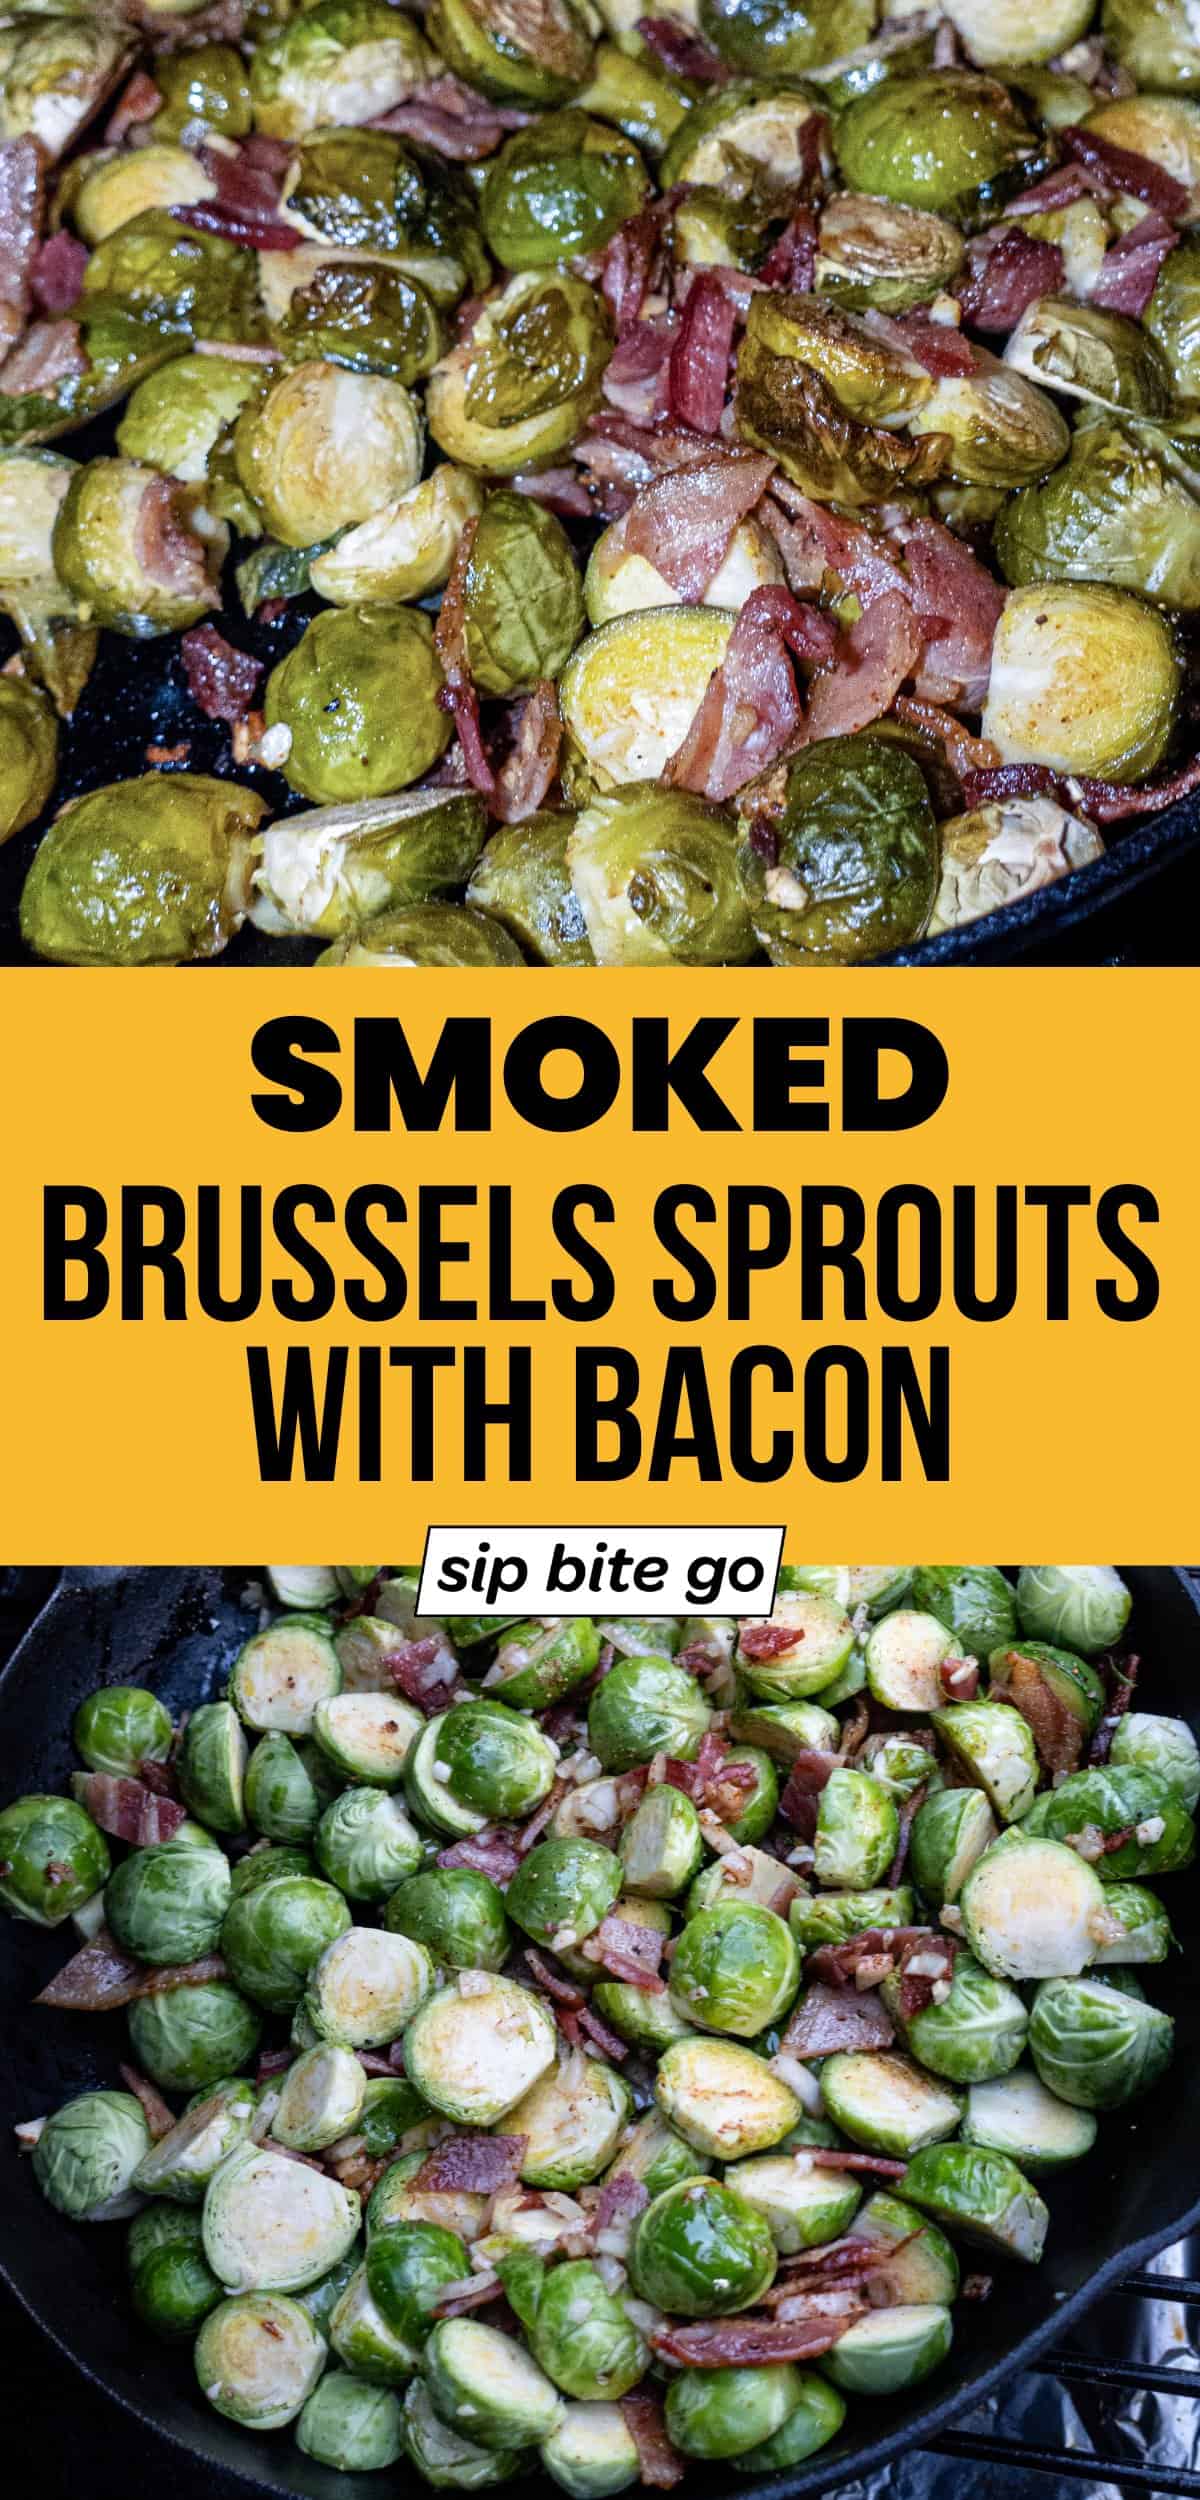 Traeger Smoked Brussels Sprouts Side Dish Recipe Images with text overlay Sip Bite Go